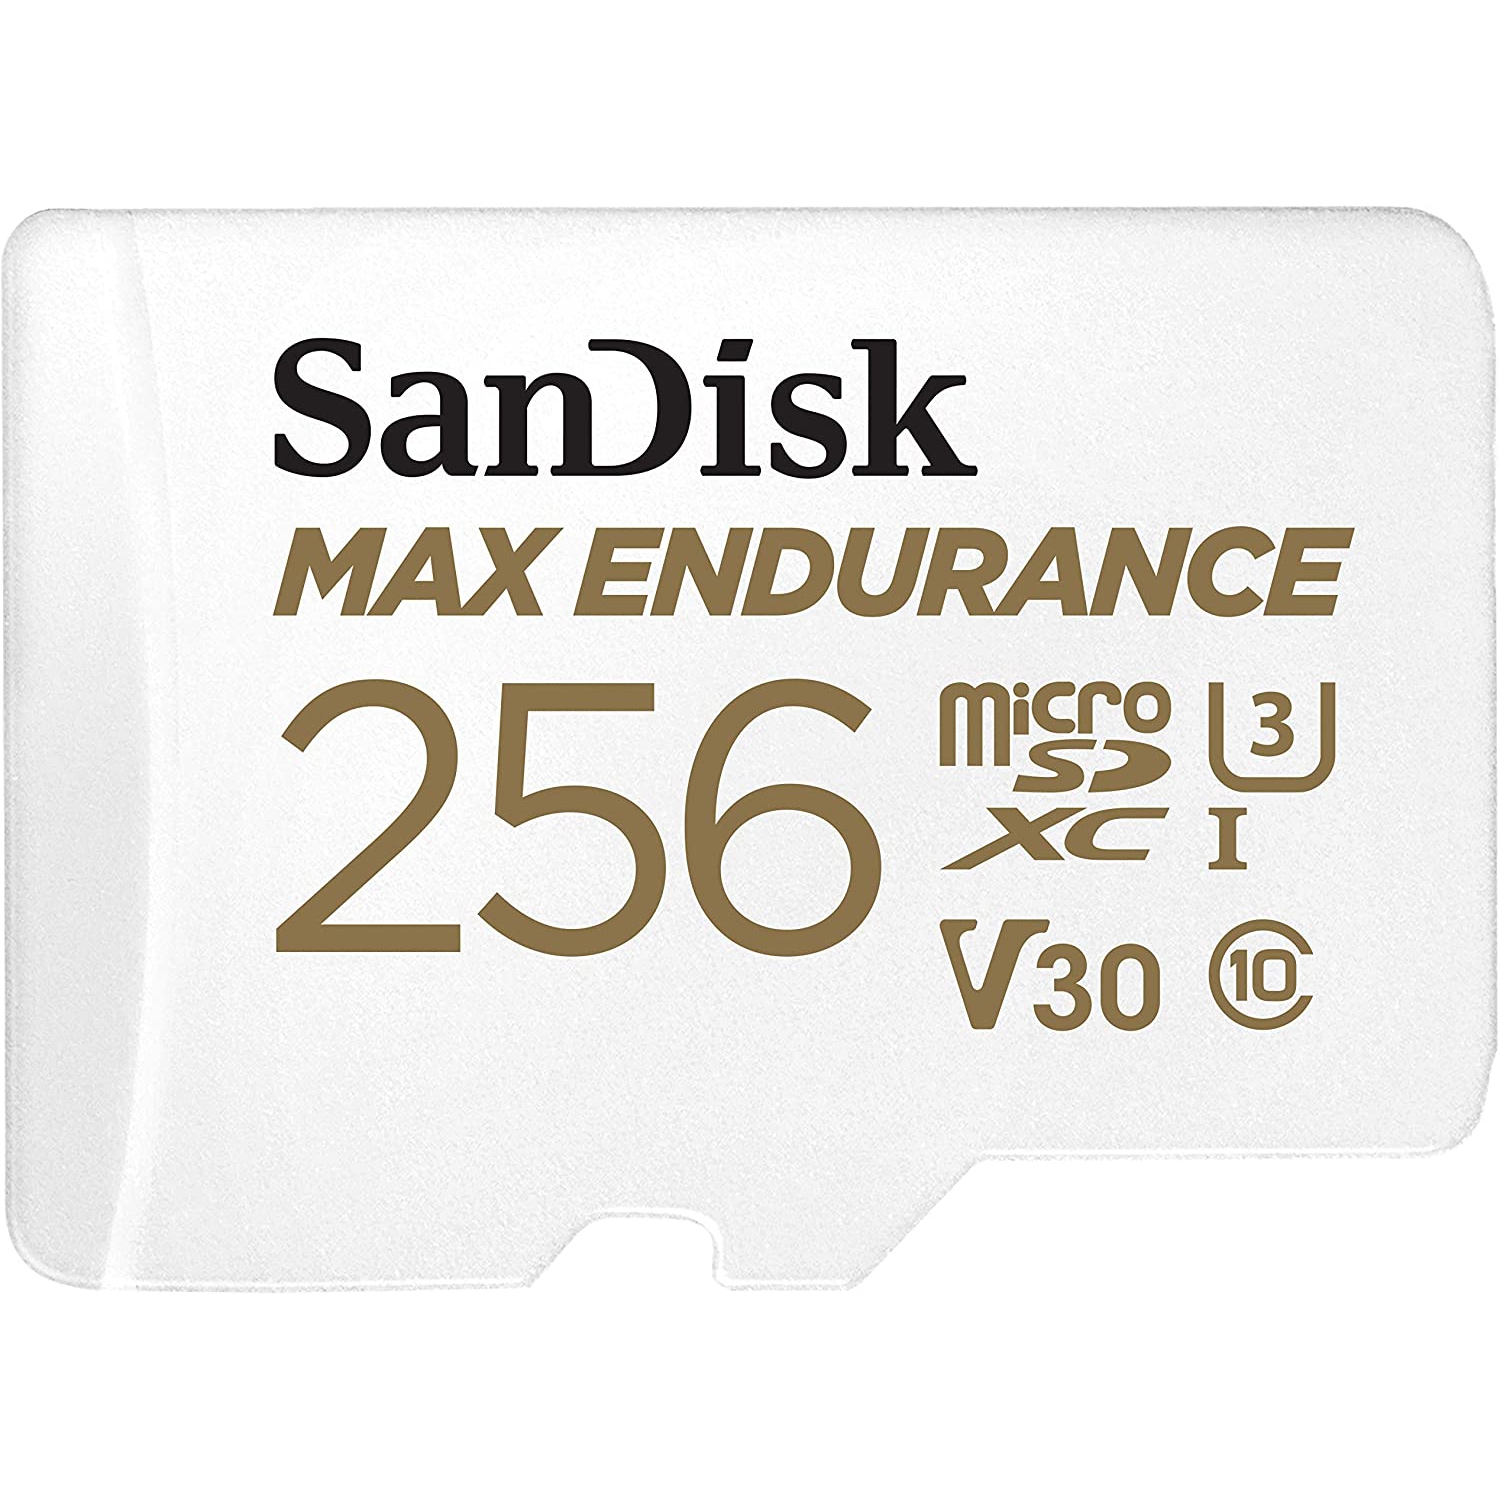 SanDisk MAX Endurance 256GB Micro SD Card with Adapter SDSQQVR-256G for Dash Cam and Video Monitoring System